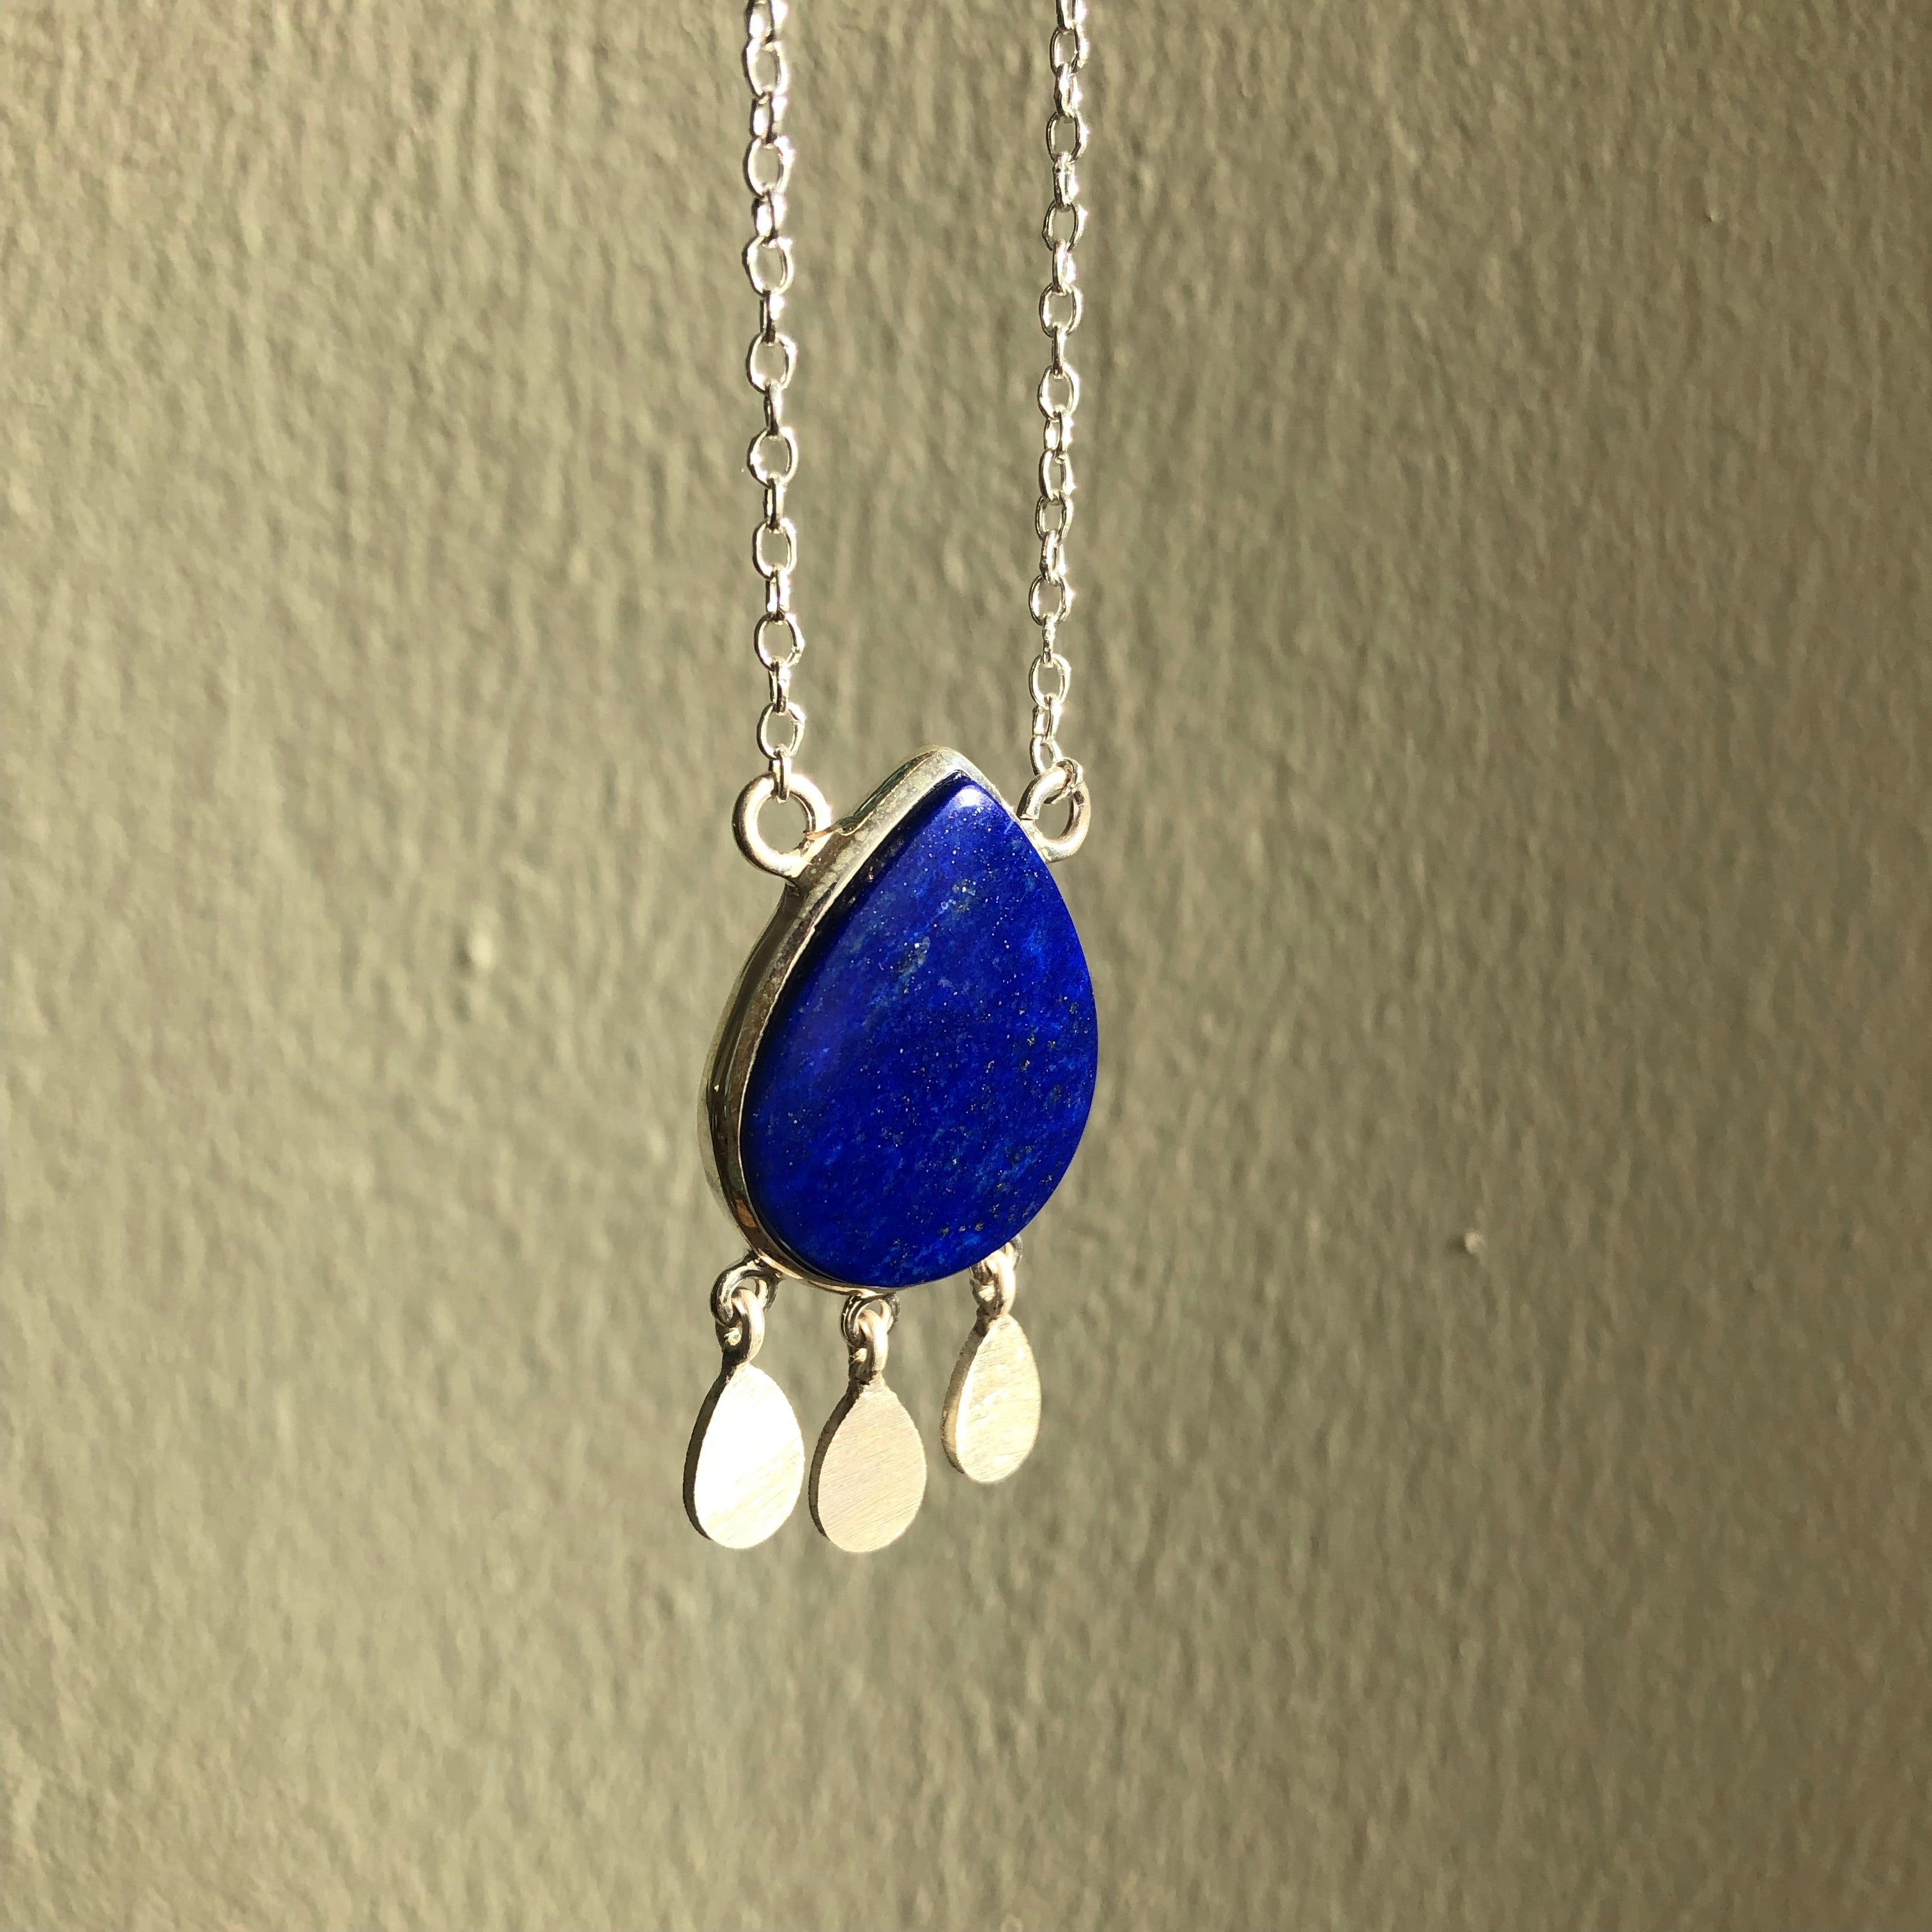 Persian Necklaces Handmade Silver Necklace with Lapis lazuli:Persian Jewelry-A ART GALLERY